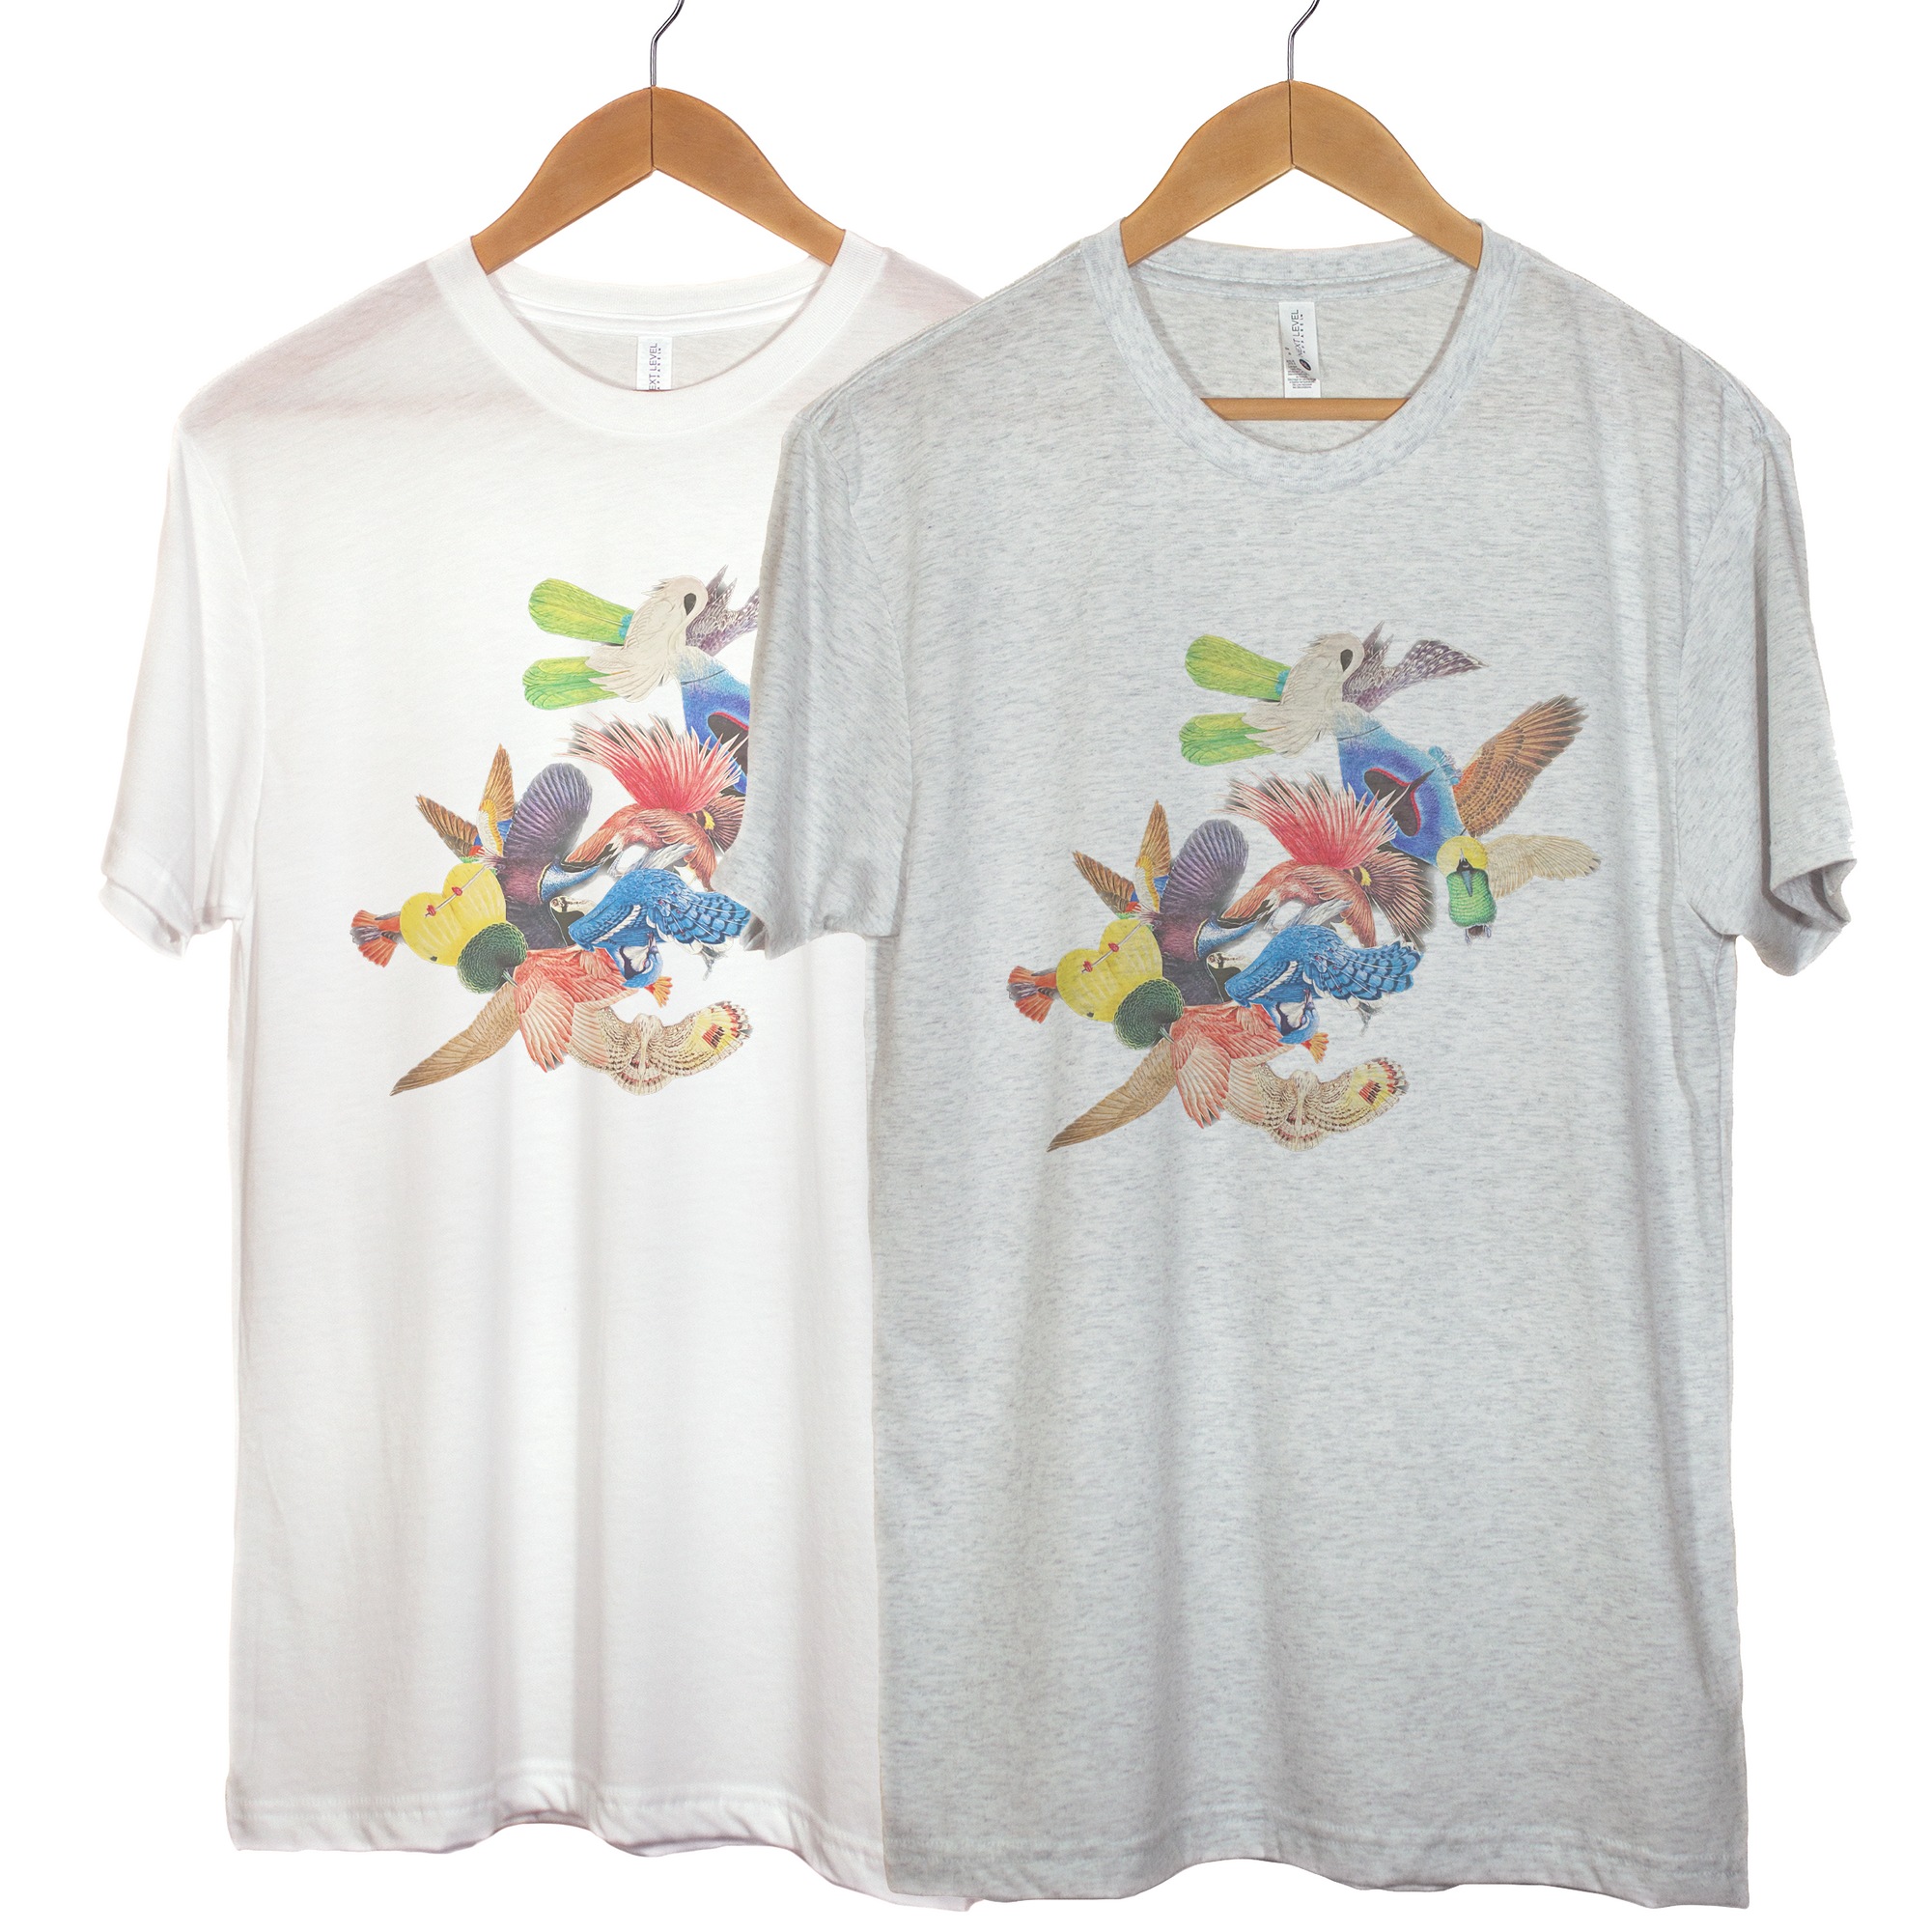 "Birds of a Feather" - Triblend Tee